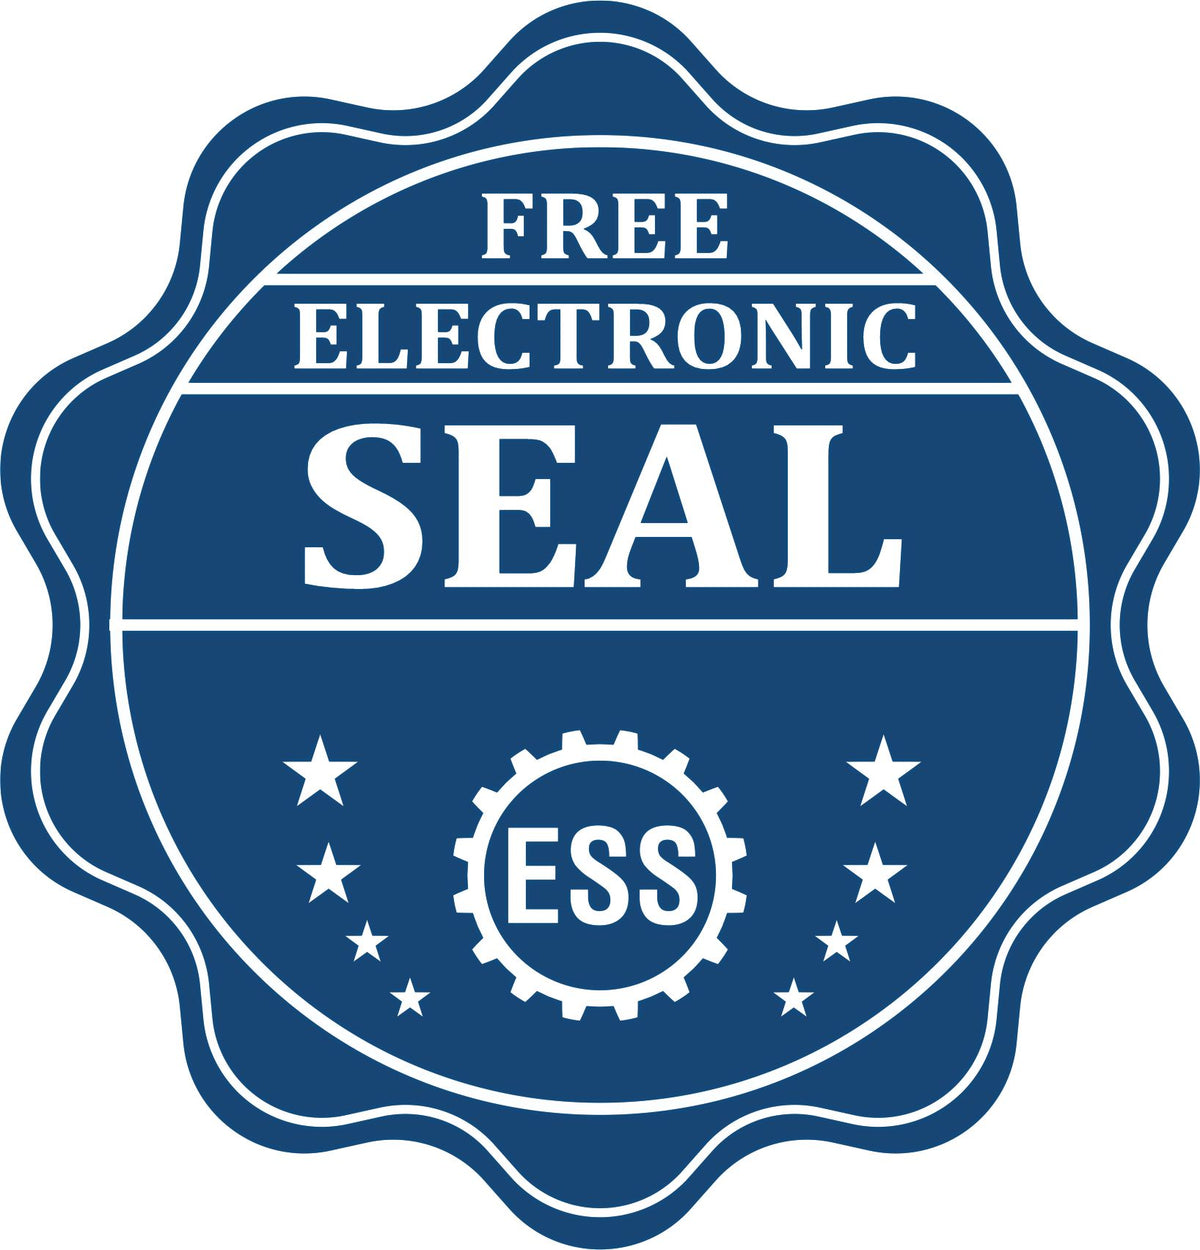 A badge showing a free electronic seal for the Heavy Duty Cast Iron Florida Engineer Seal Embosser with stars and the ESS gear on the emblem.